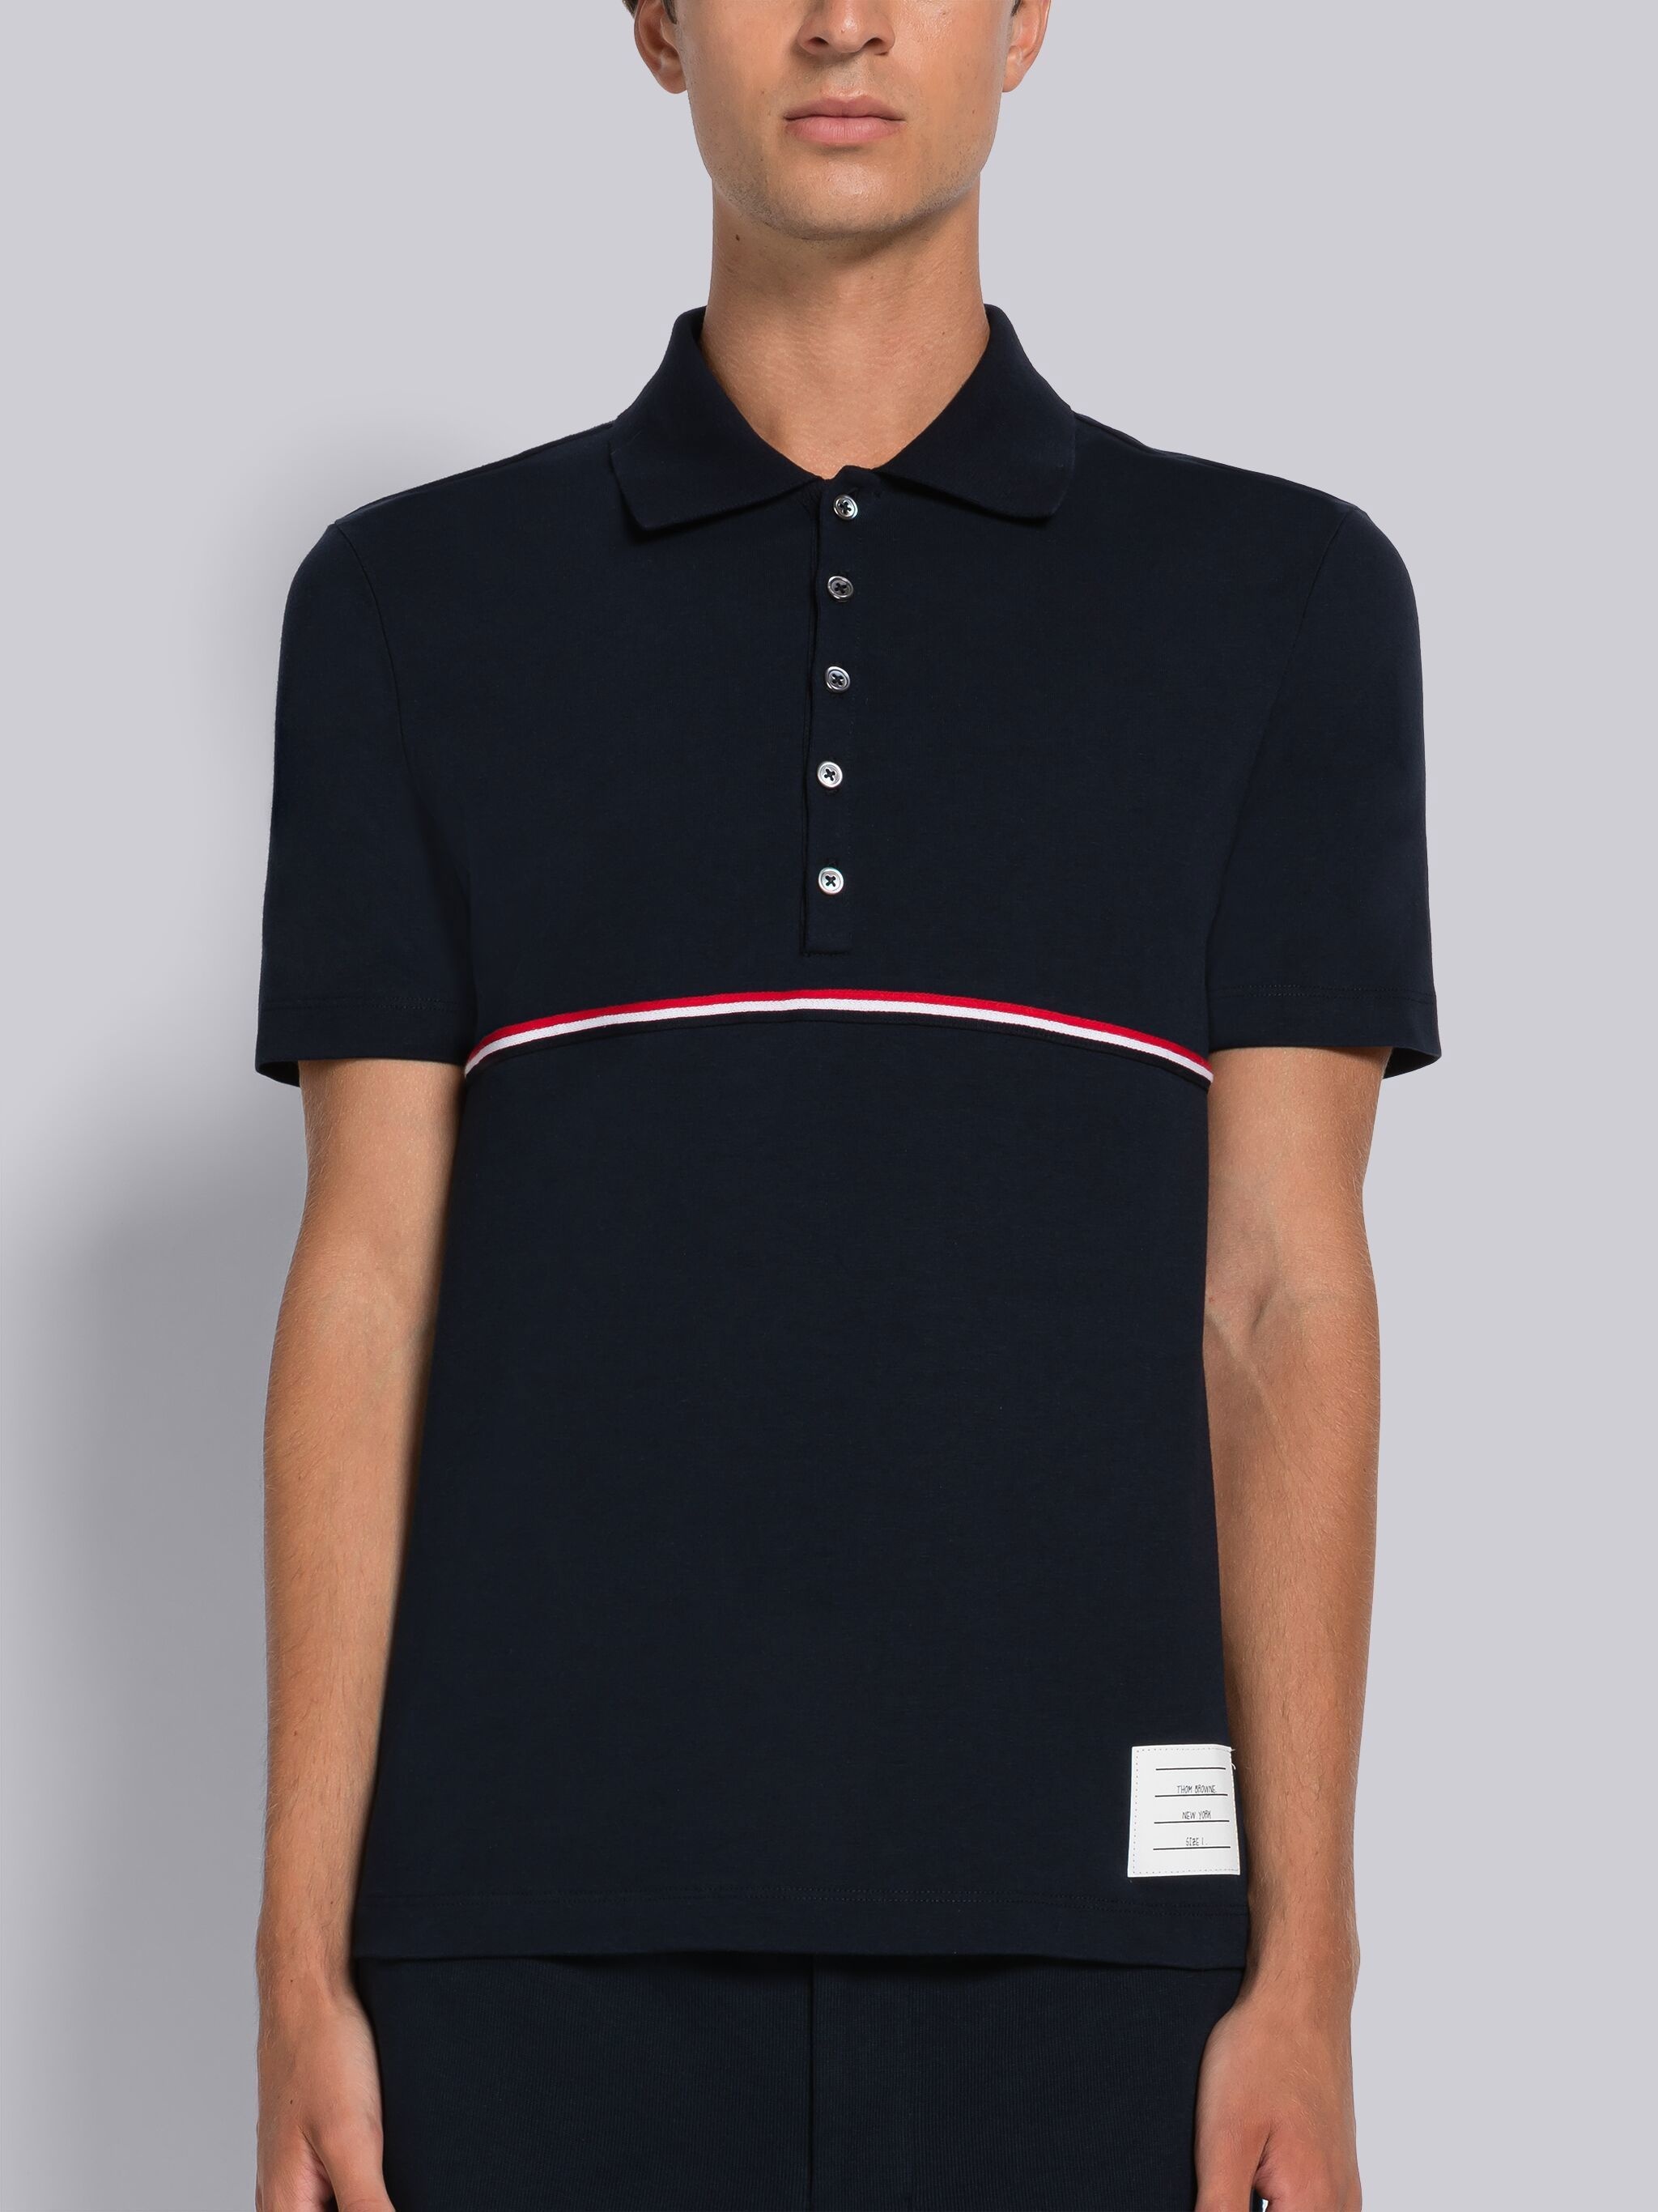 Midweight Jersey Stripe Short Sleeve Polo - 1